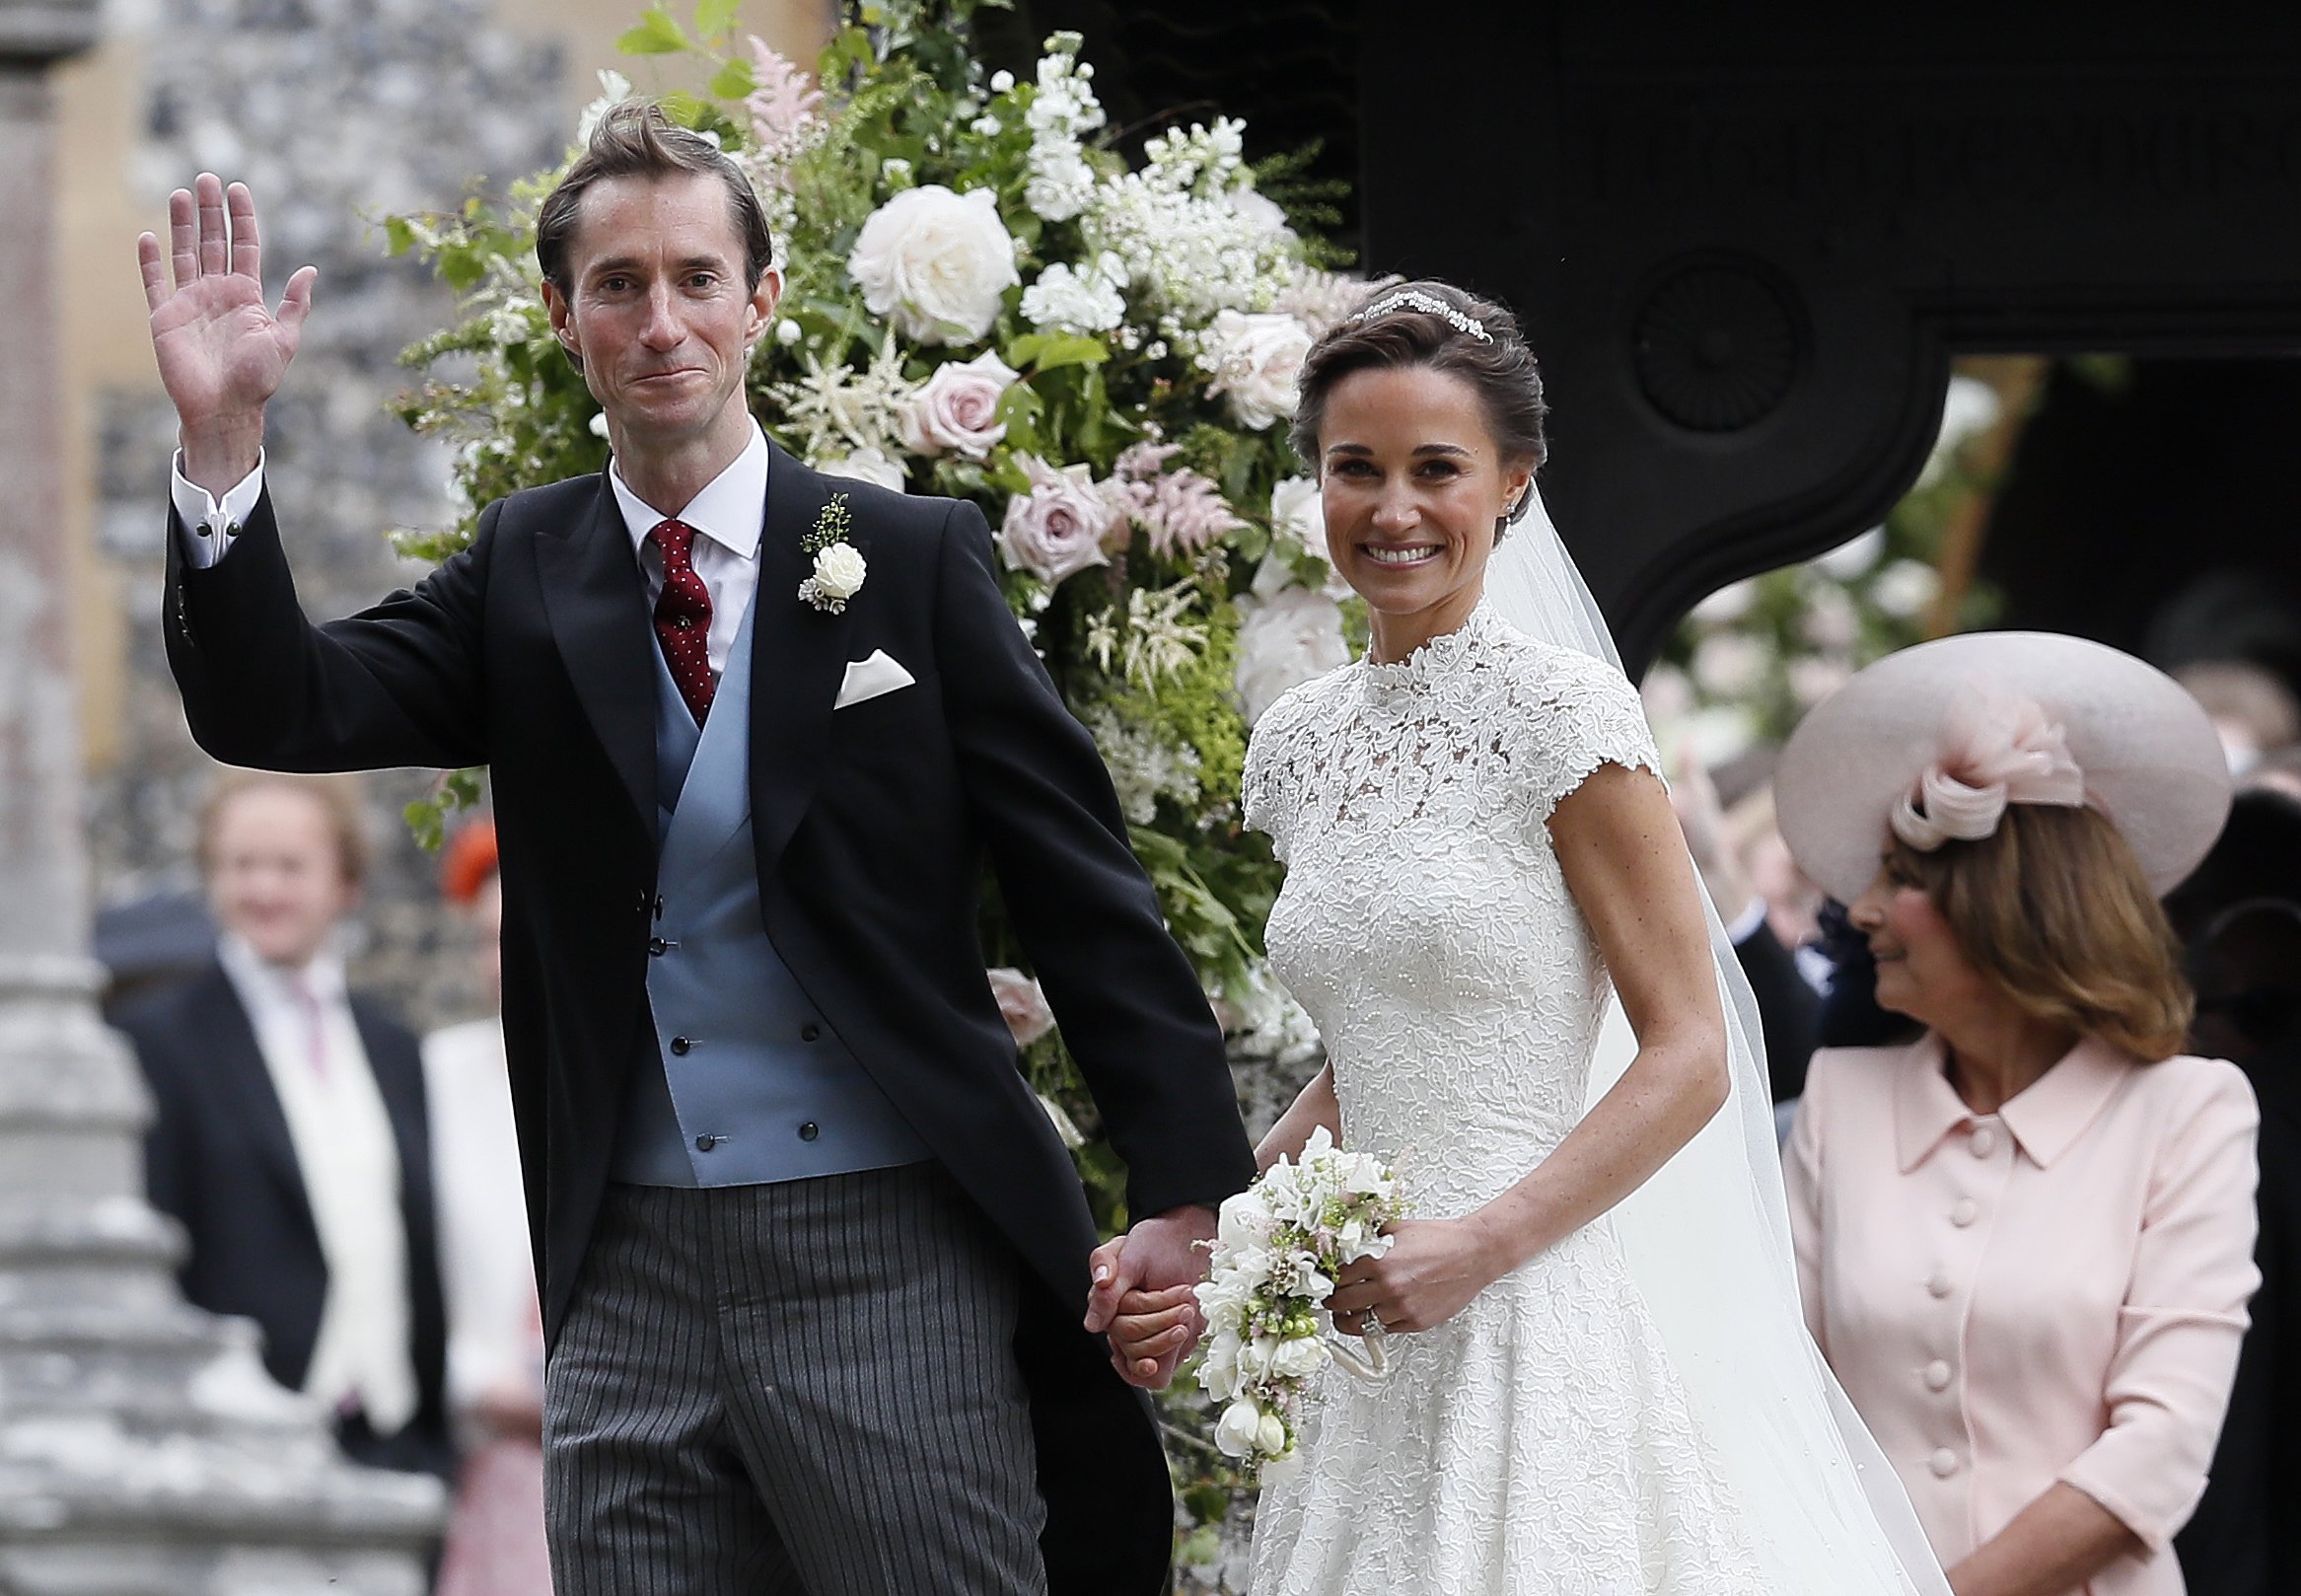 Pippa Middleton and James Matthews smile for the cameras after their wedding at St Mark's Church | Source: Getty Images